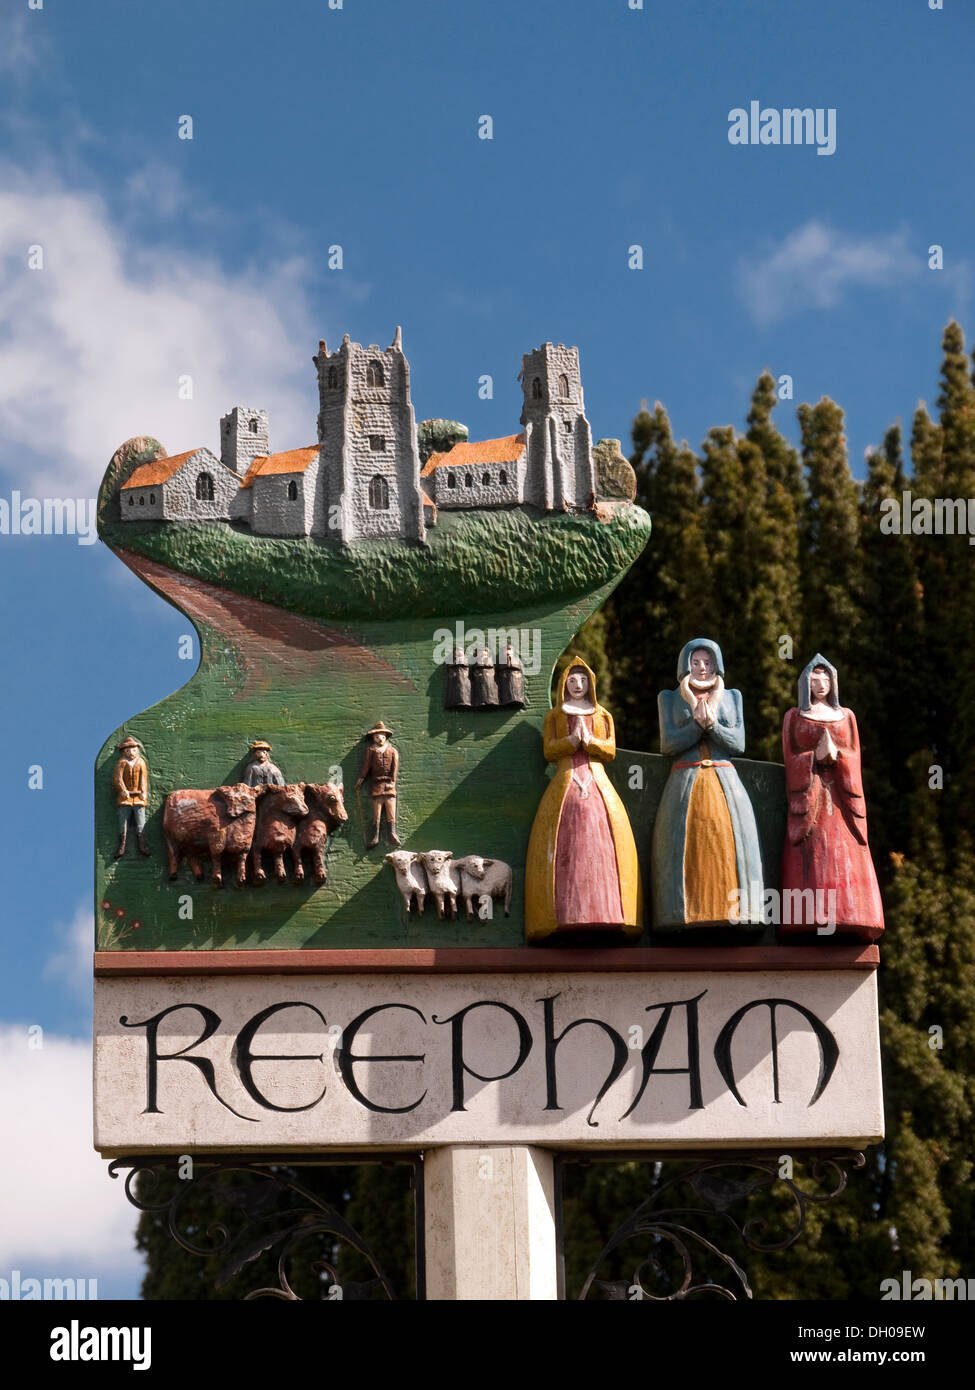 The Sign for the Ancient Market Town of Reepham in Norfolk, England Stock Photo